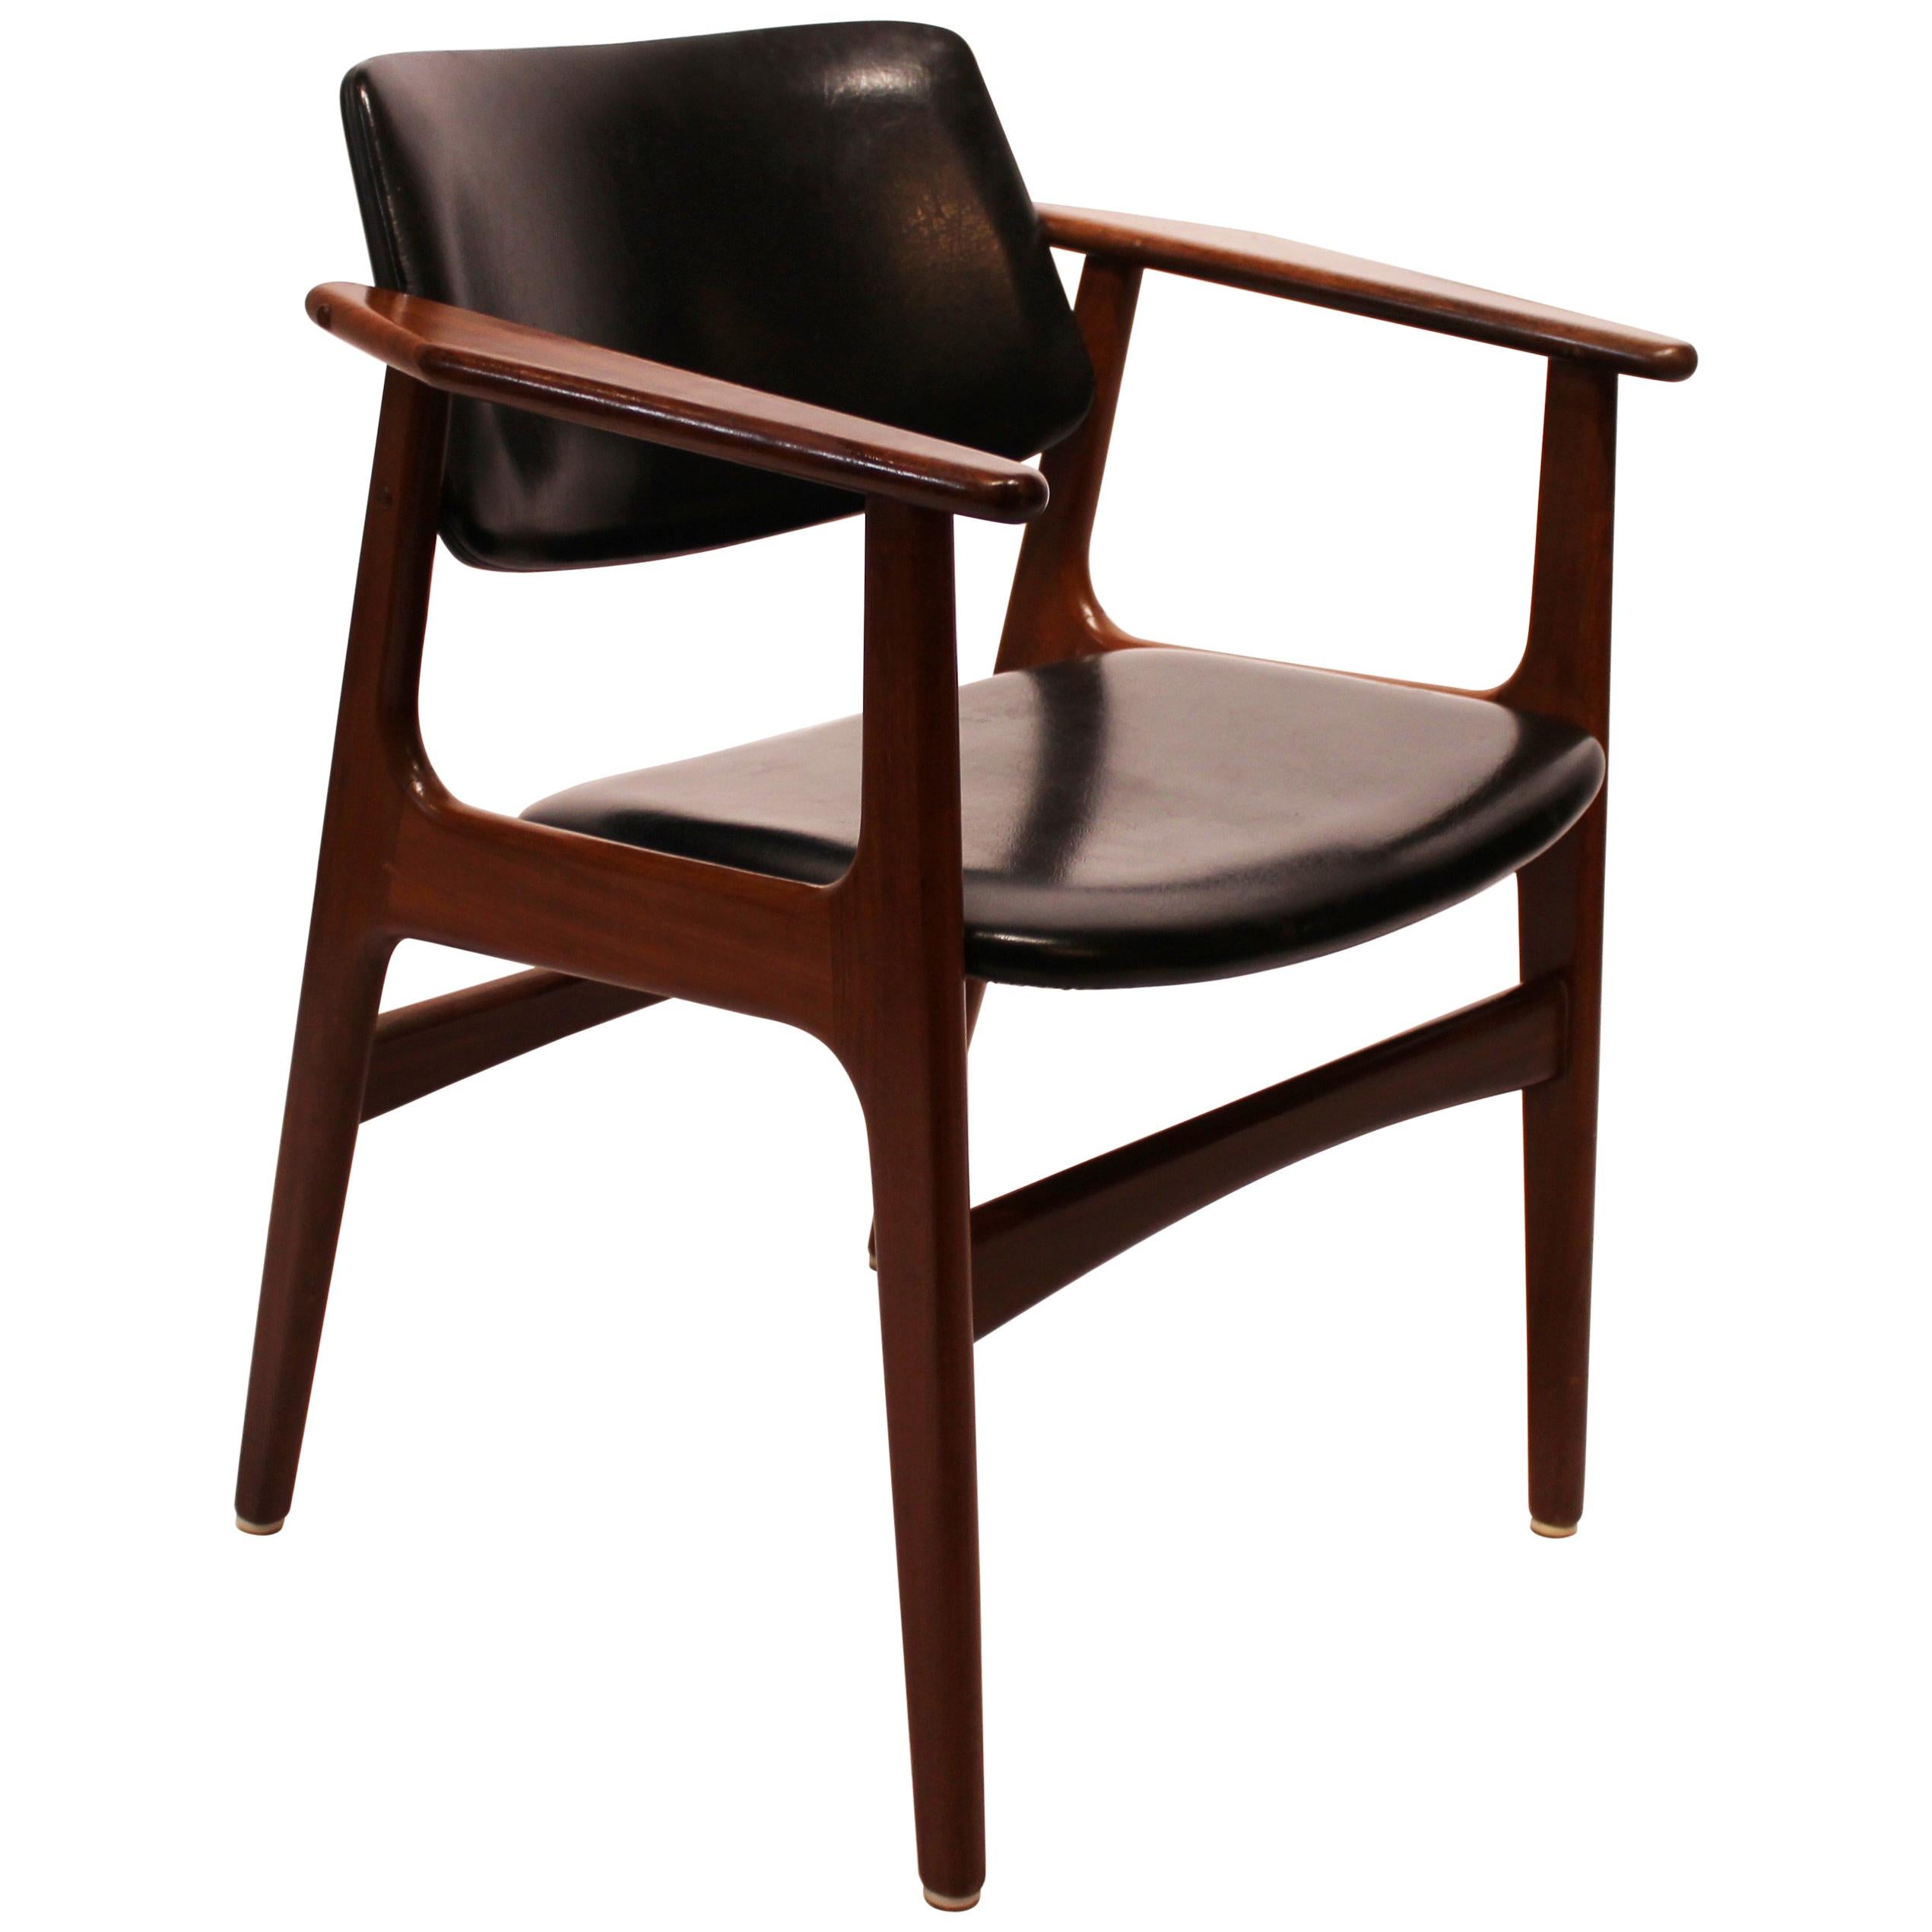 Armchair in Teak and Black Leather of Danish Design from the 1960s